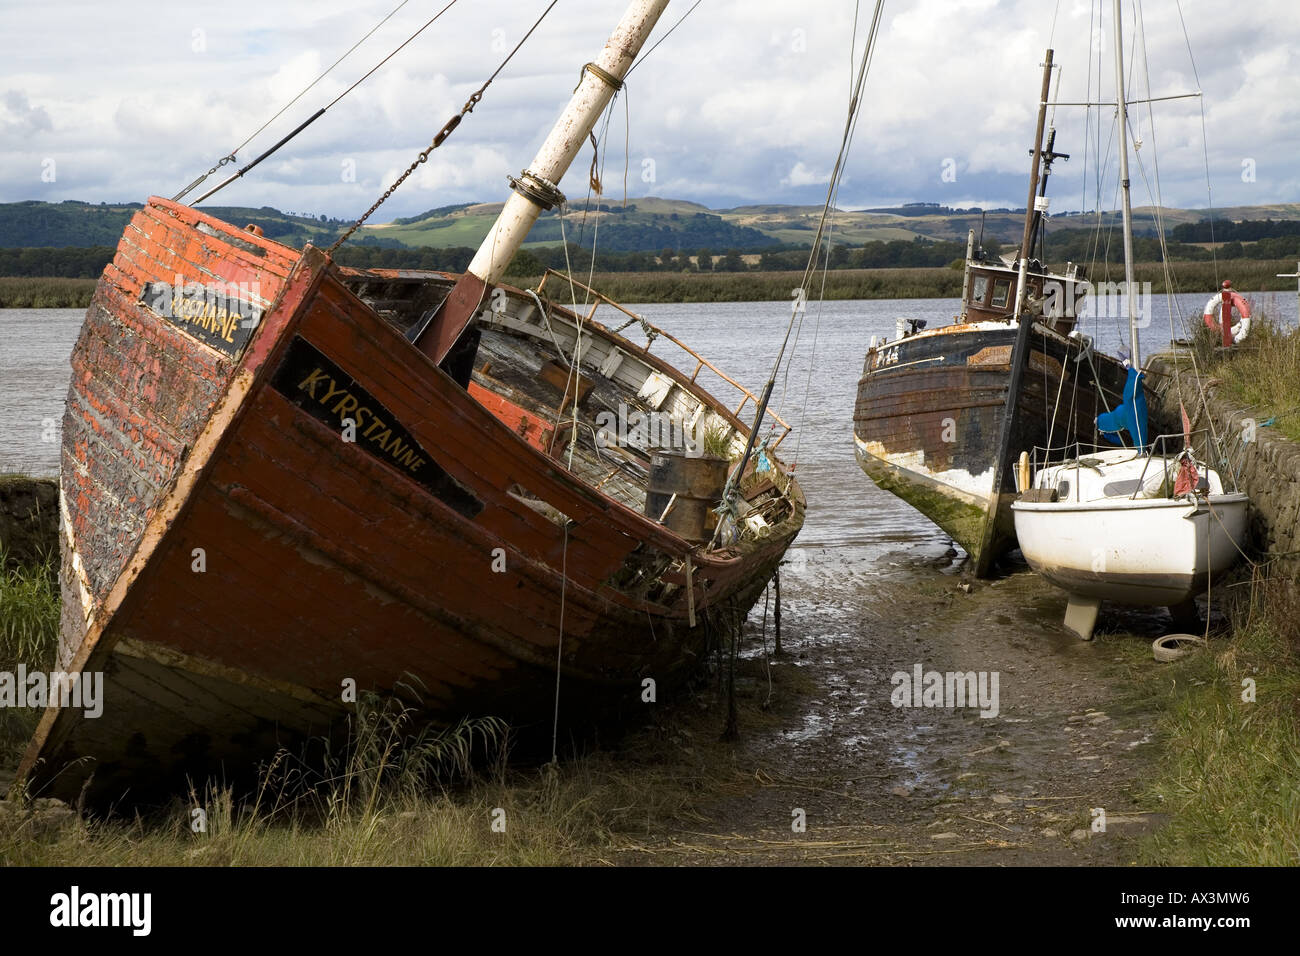 Derelict old wooden fishing boats August 2006 Stock Photo